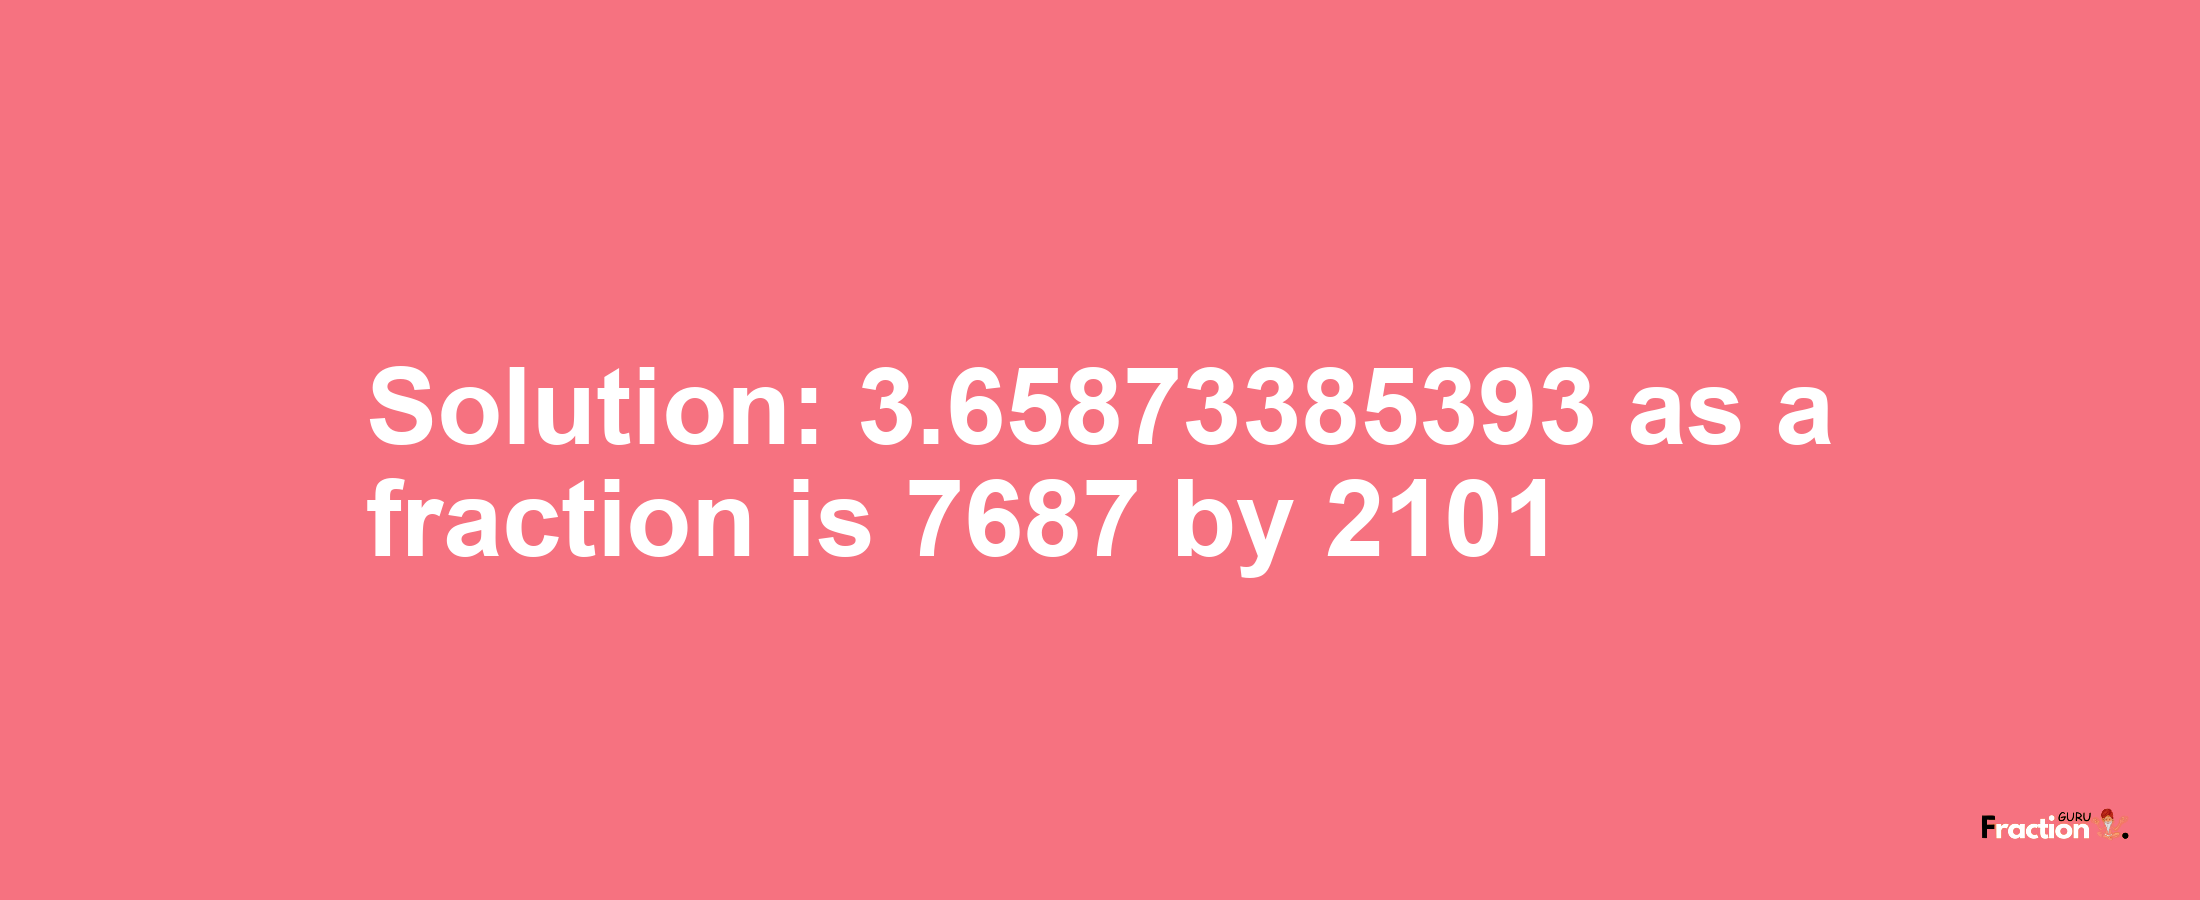 Solution:3.65873385393 as a fraction is 7687/2101